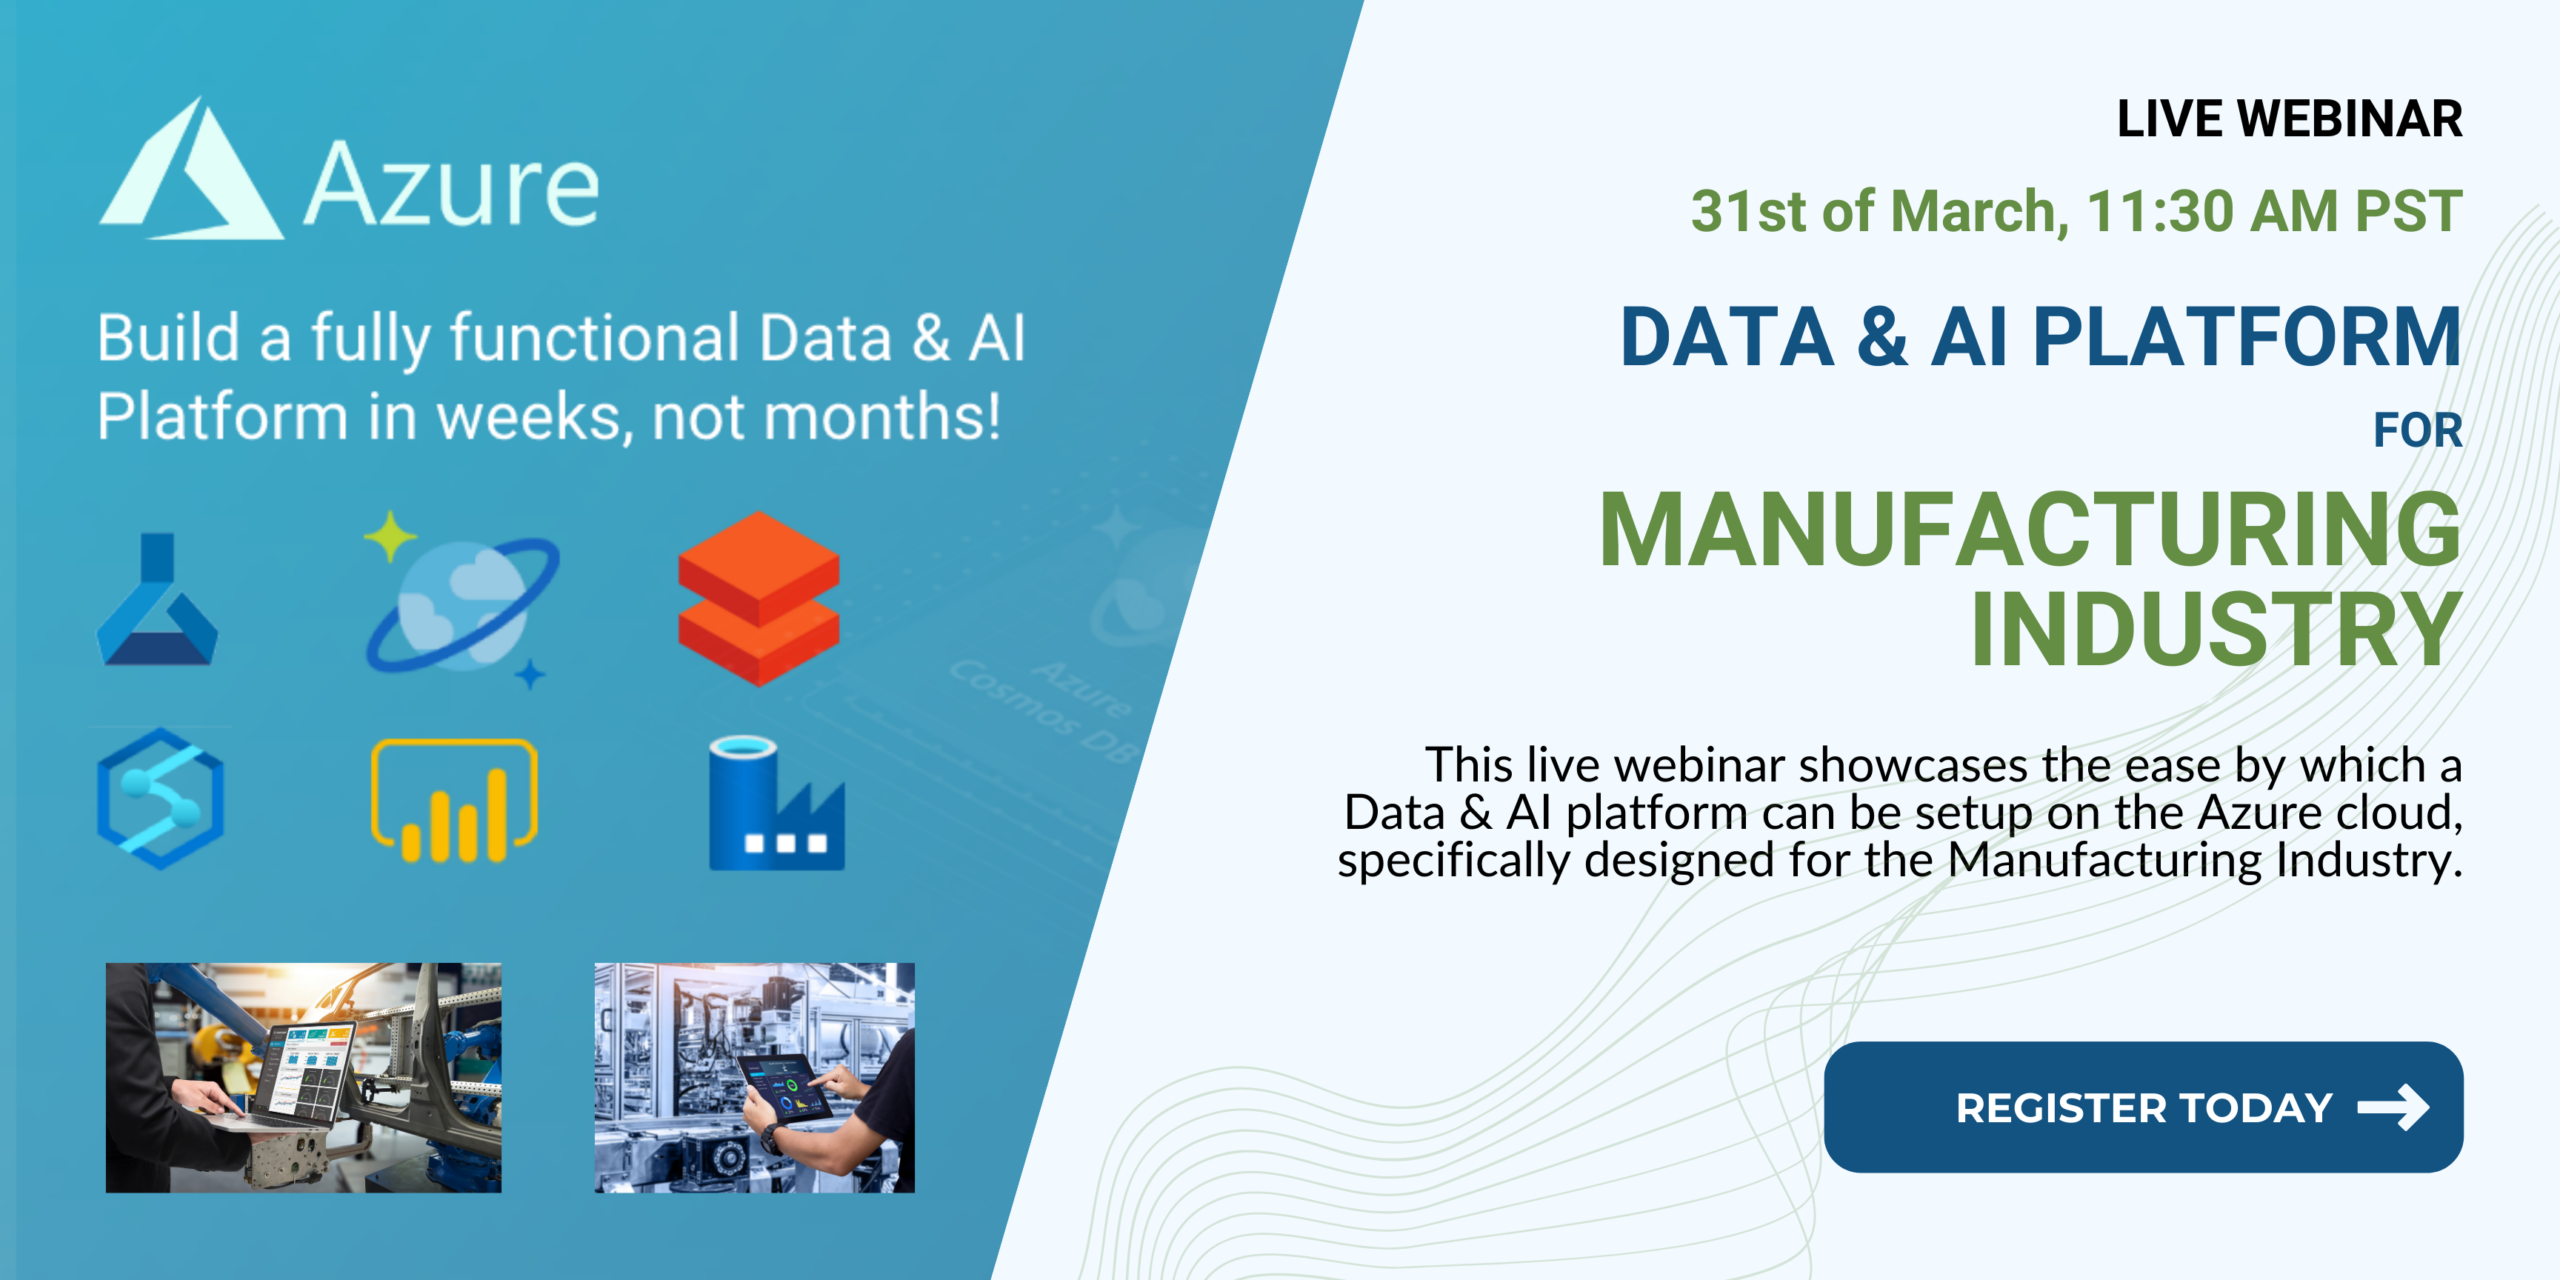 Data & AI Platform for Manufacturing Industry